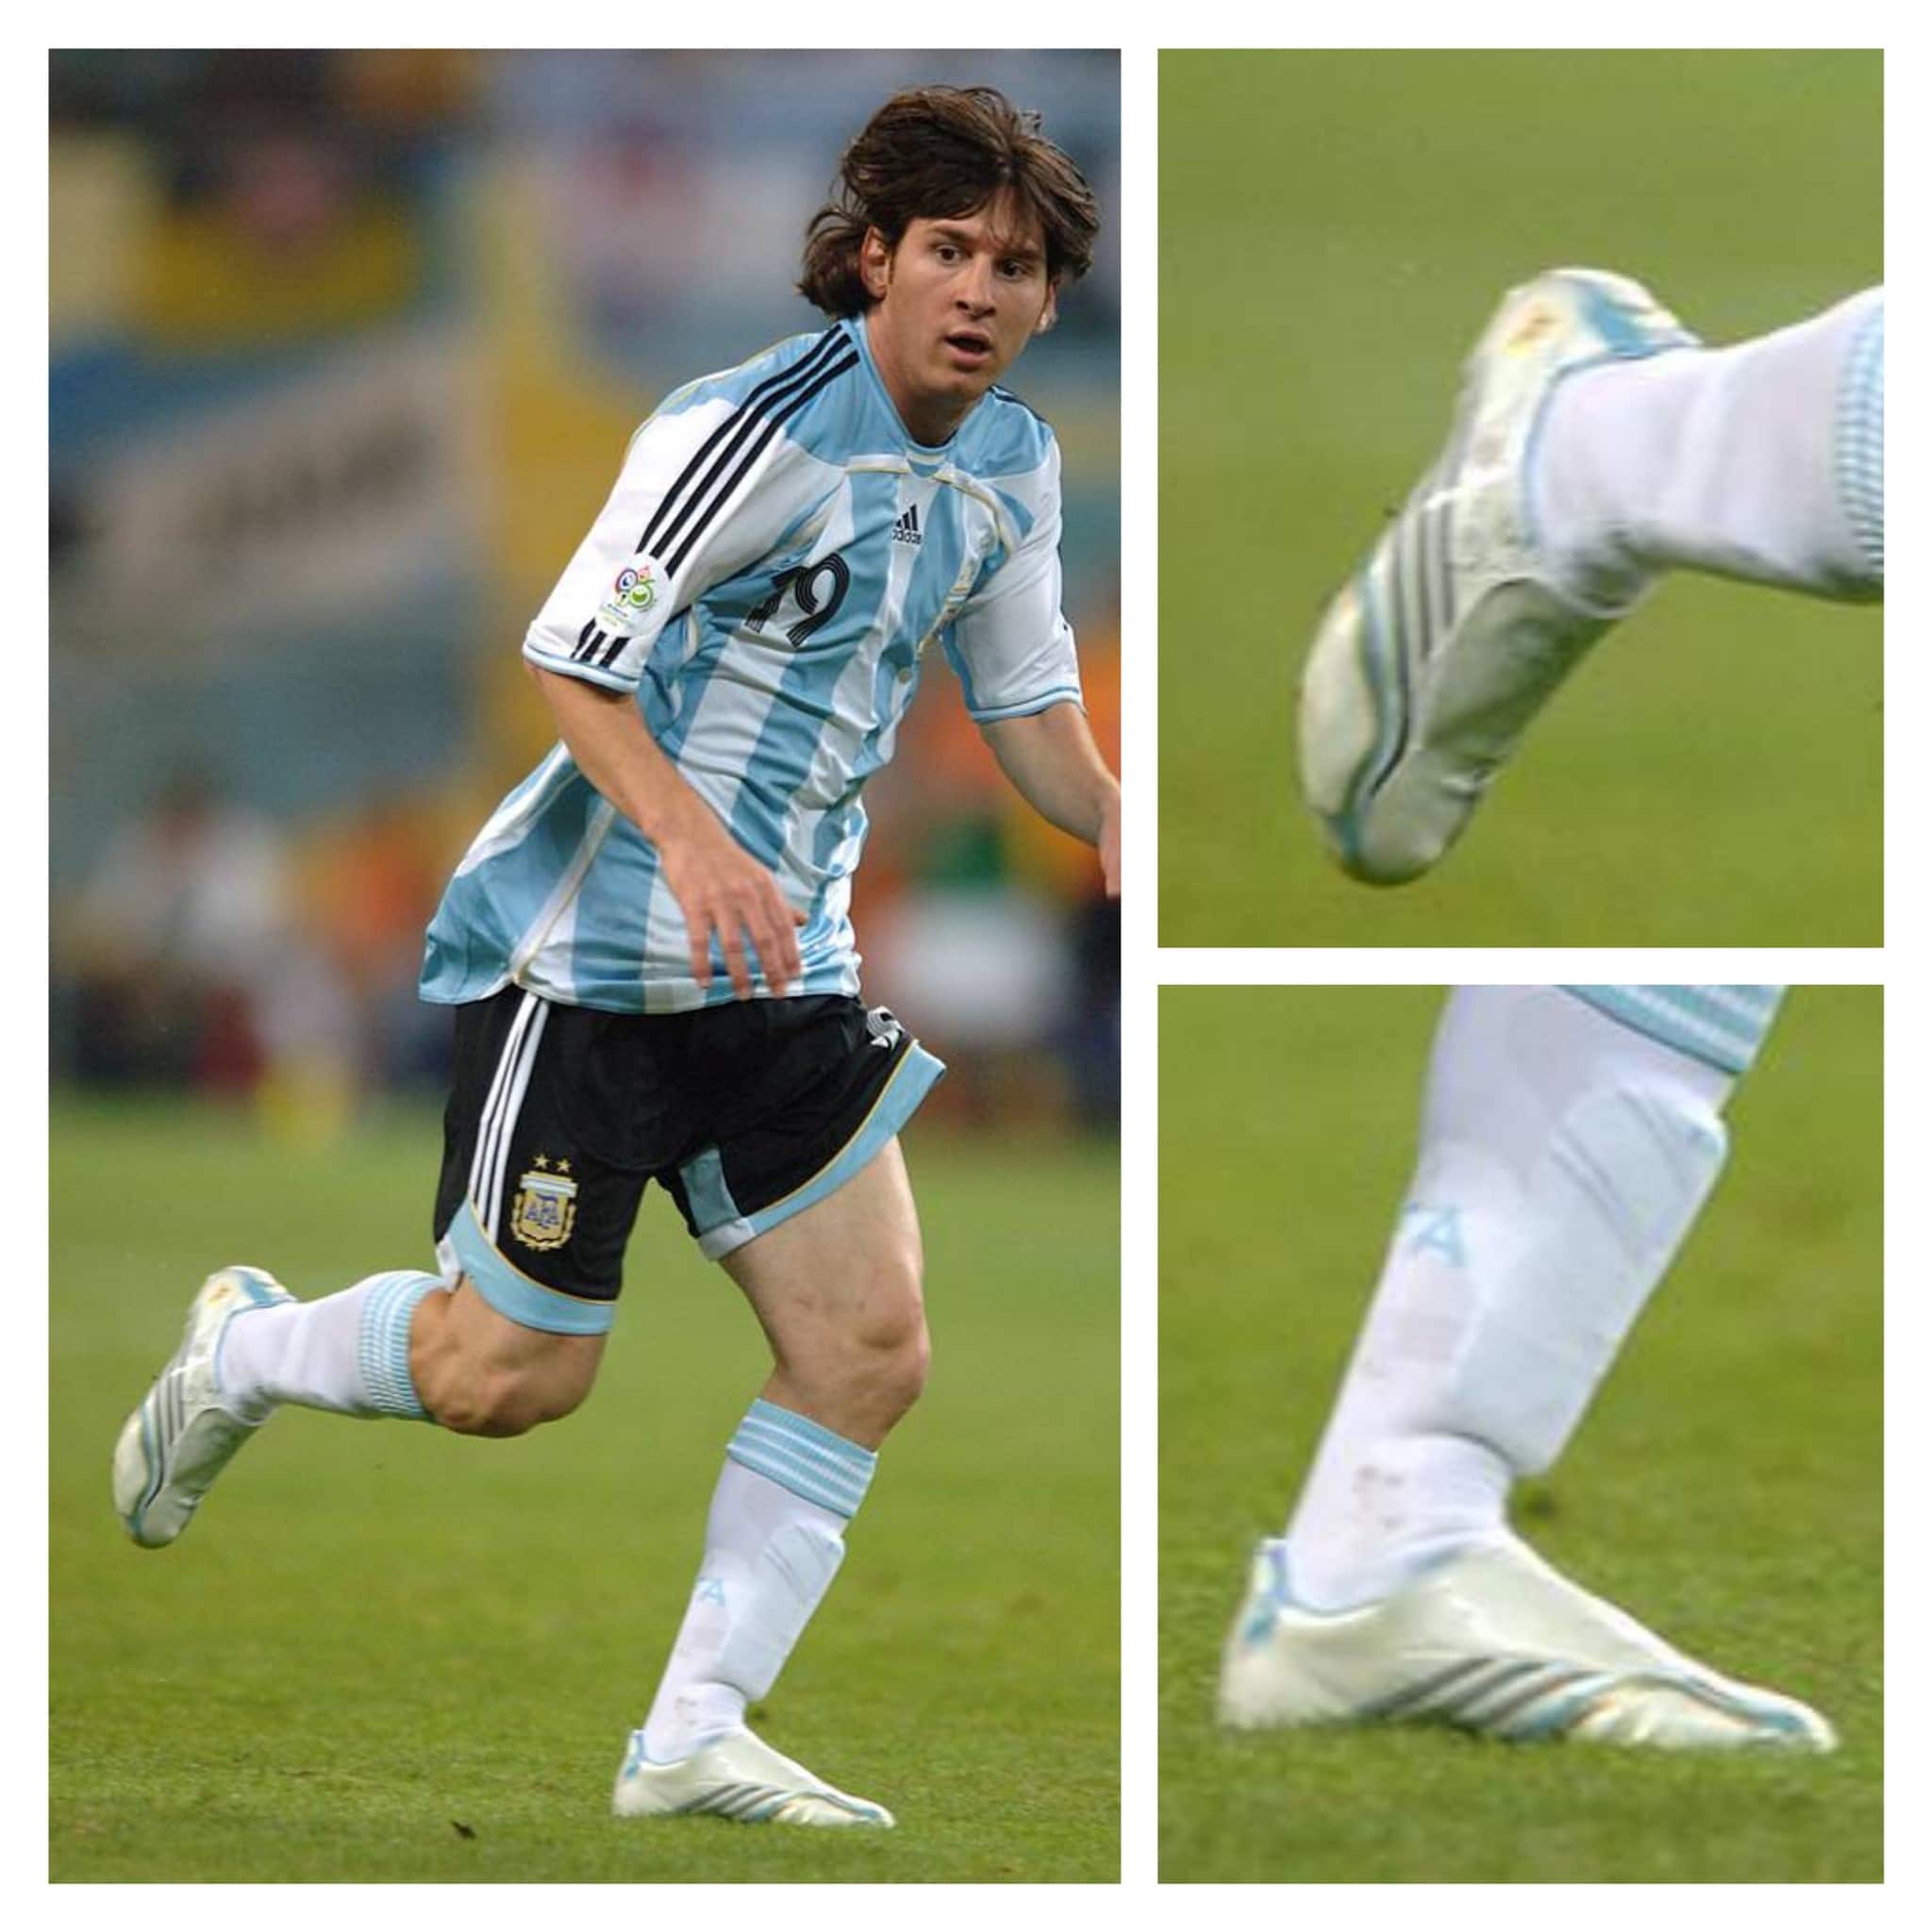 What Football Boots are Lionel Messi Wearing? - Boot History - f30.6